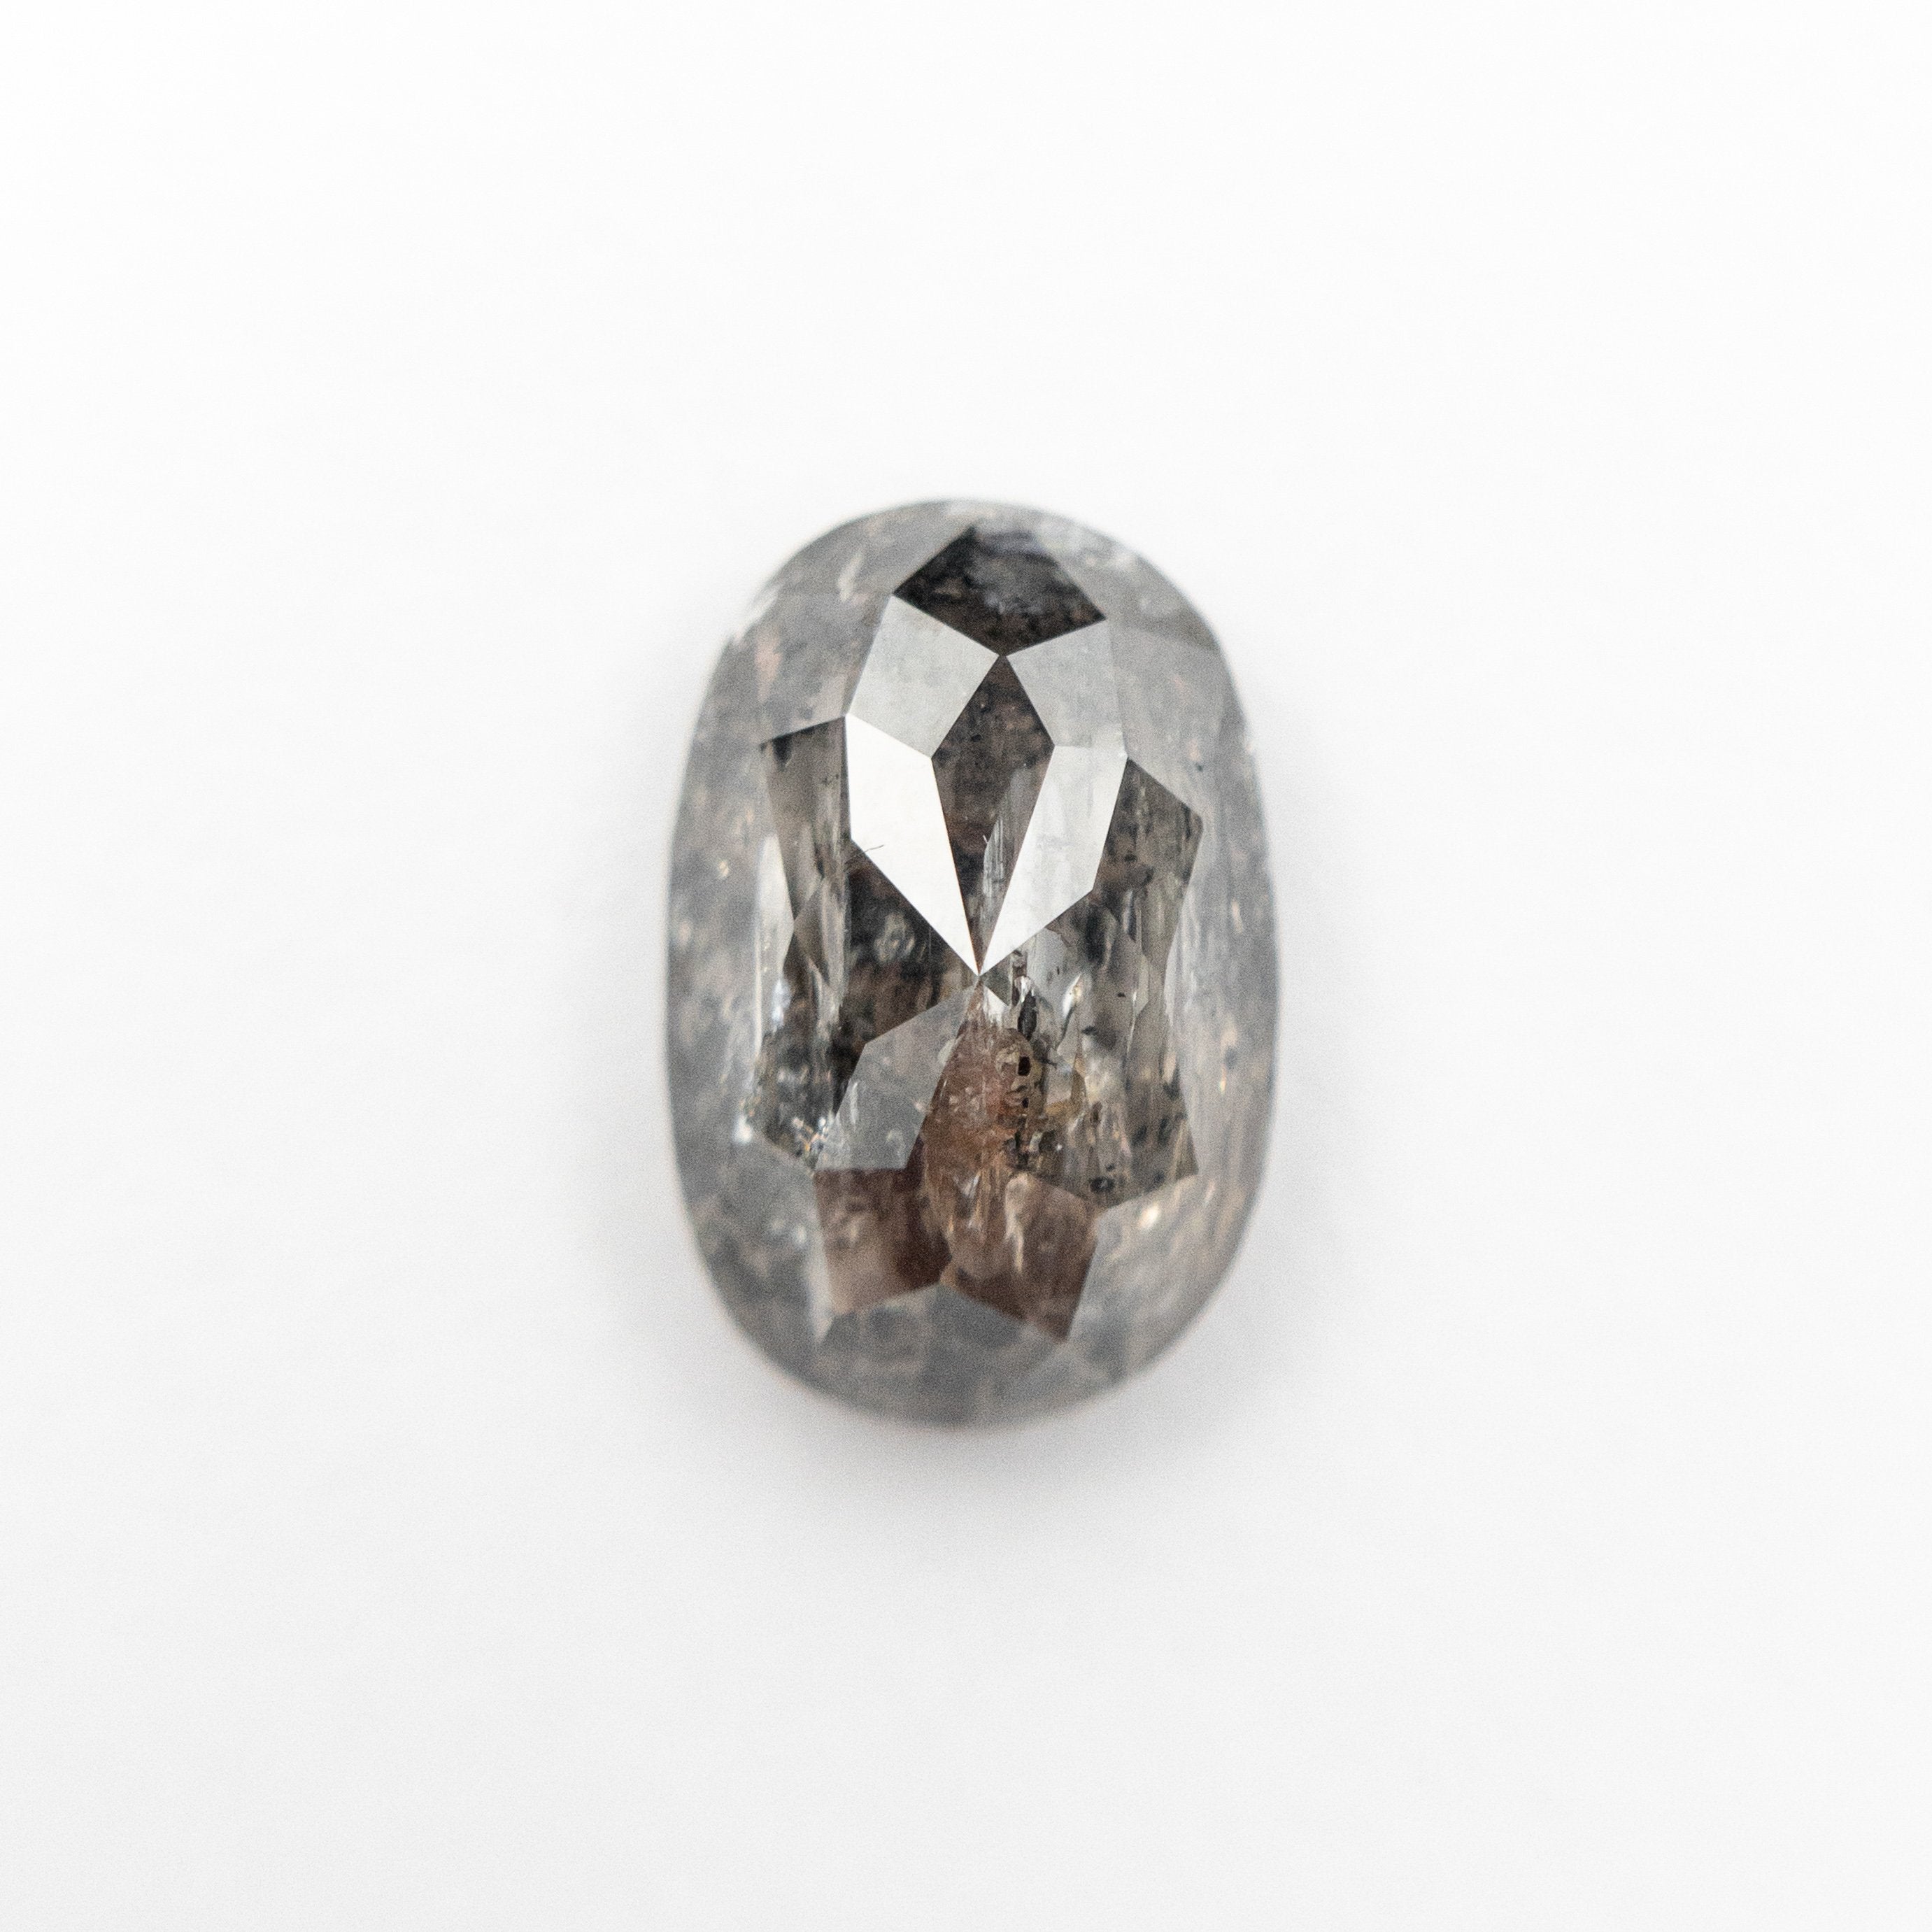 1.74ct 8.68x5.75x3.82mm Oval Double Cut 18904-05